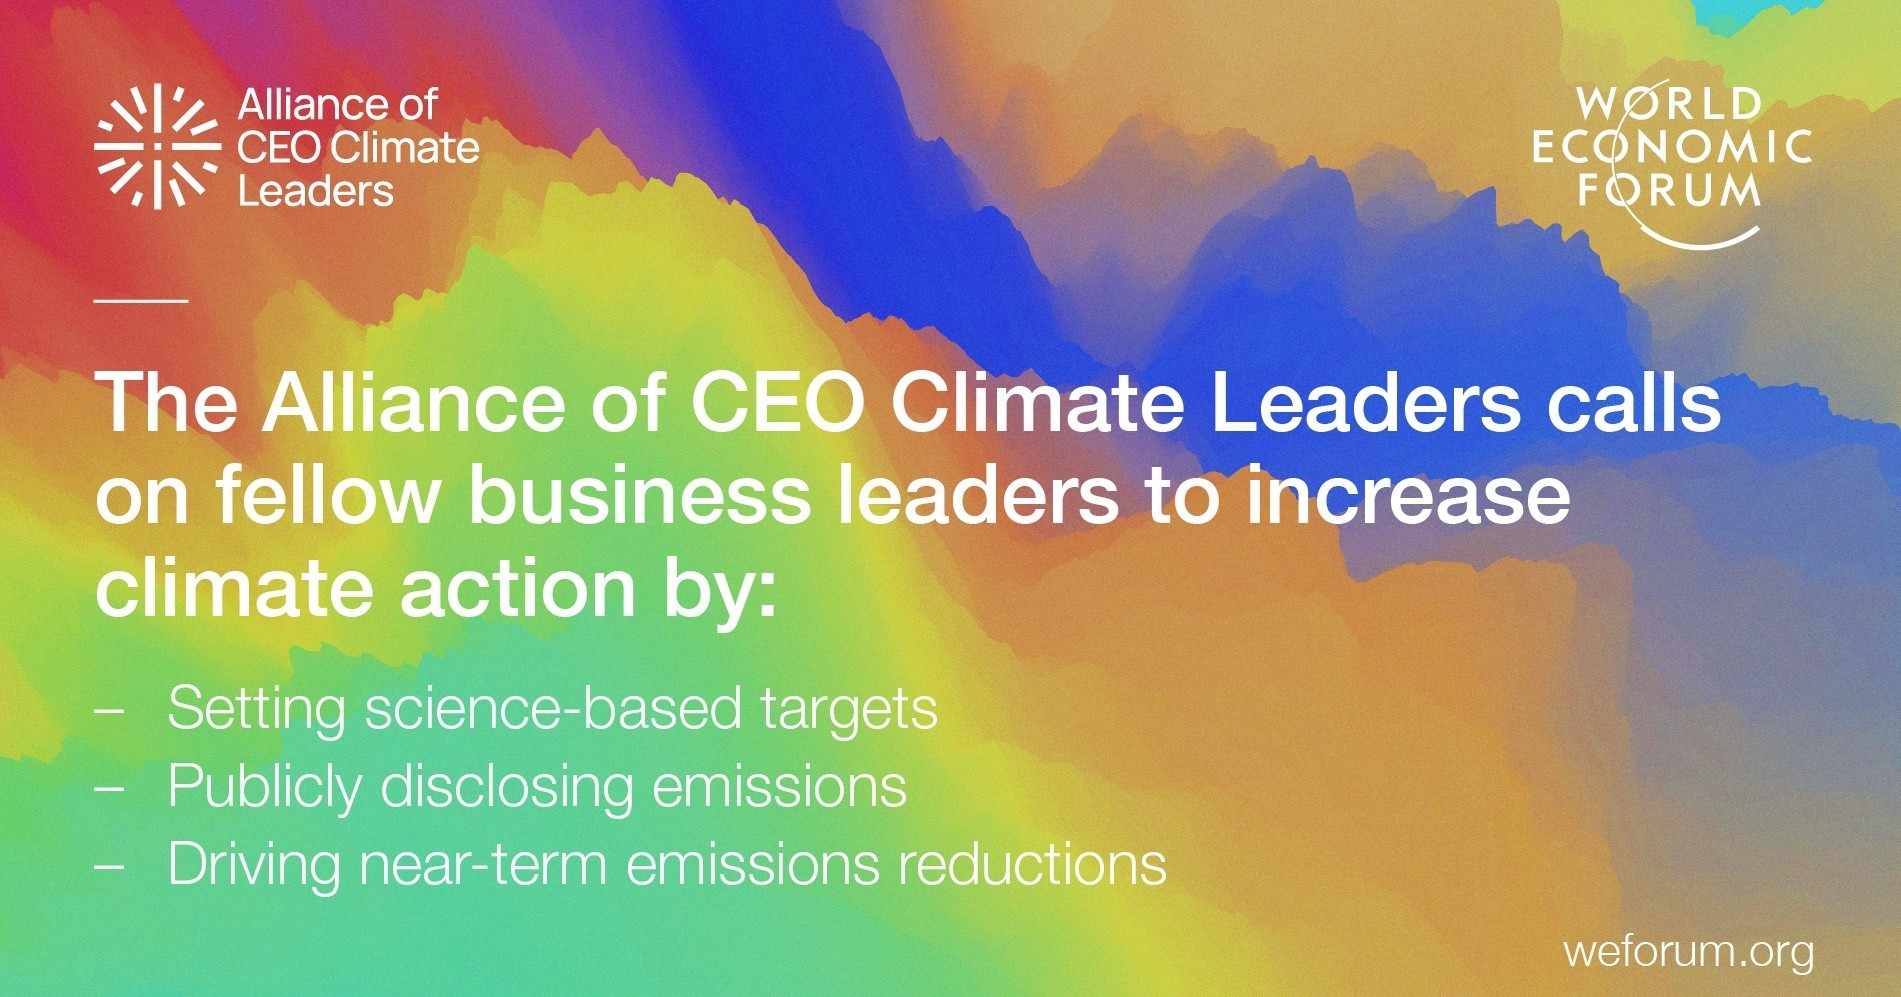 world,climate,ceo,leaders,alliance